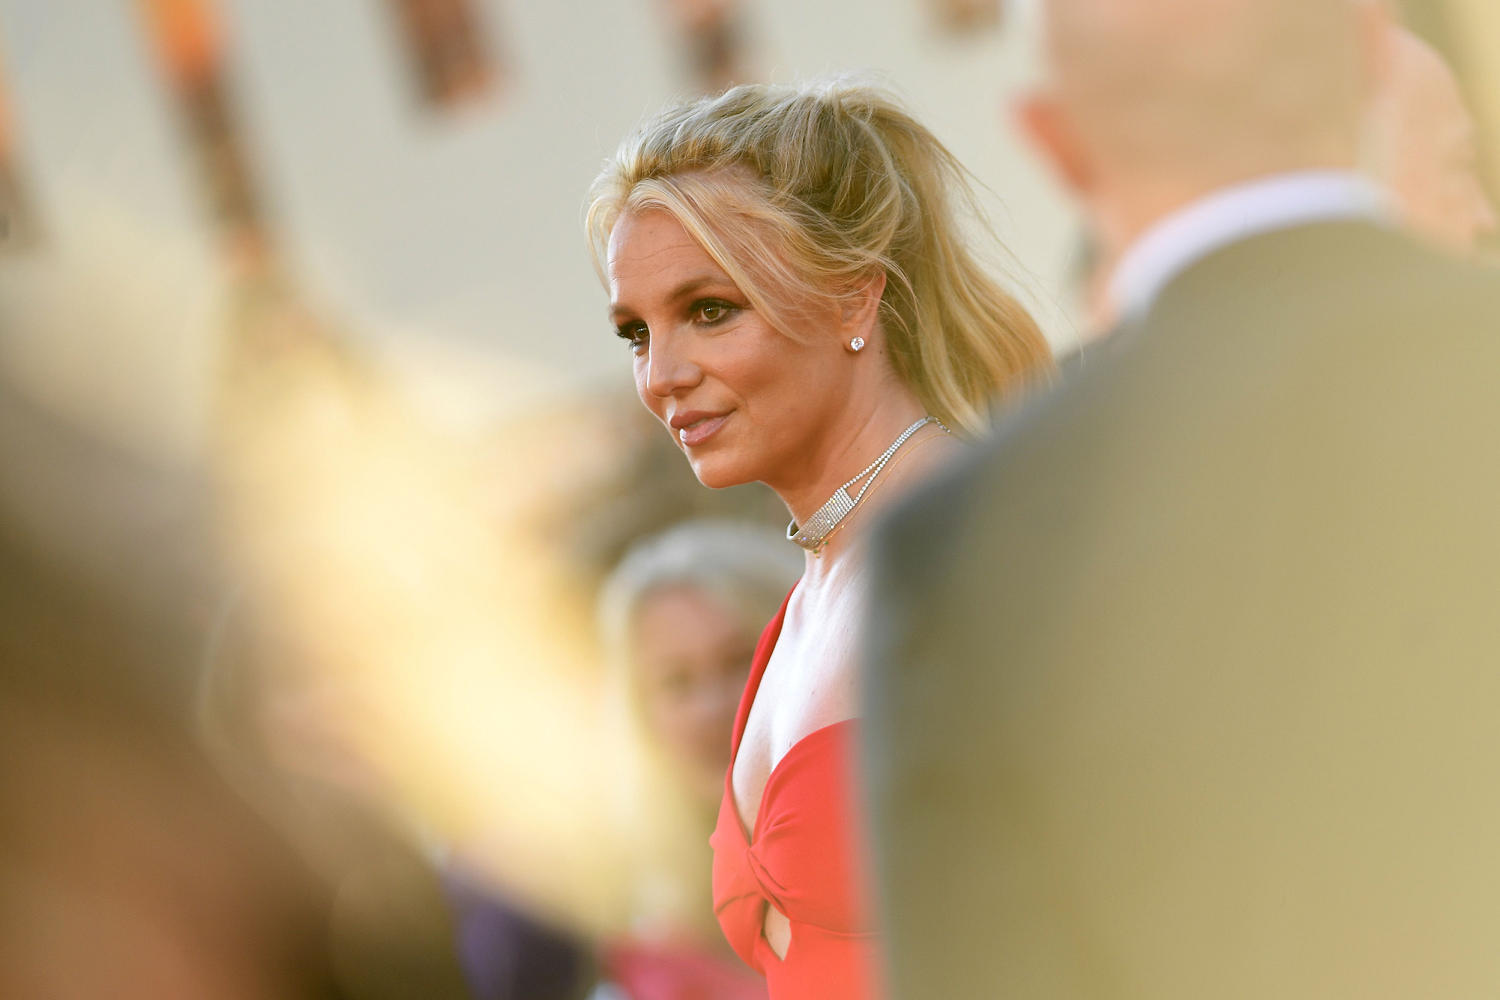 Why Britney Spears’ memoir shows fans want to read more than just celebrity gossip